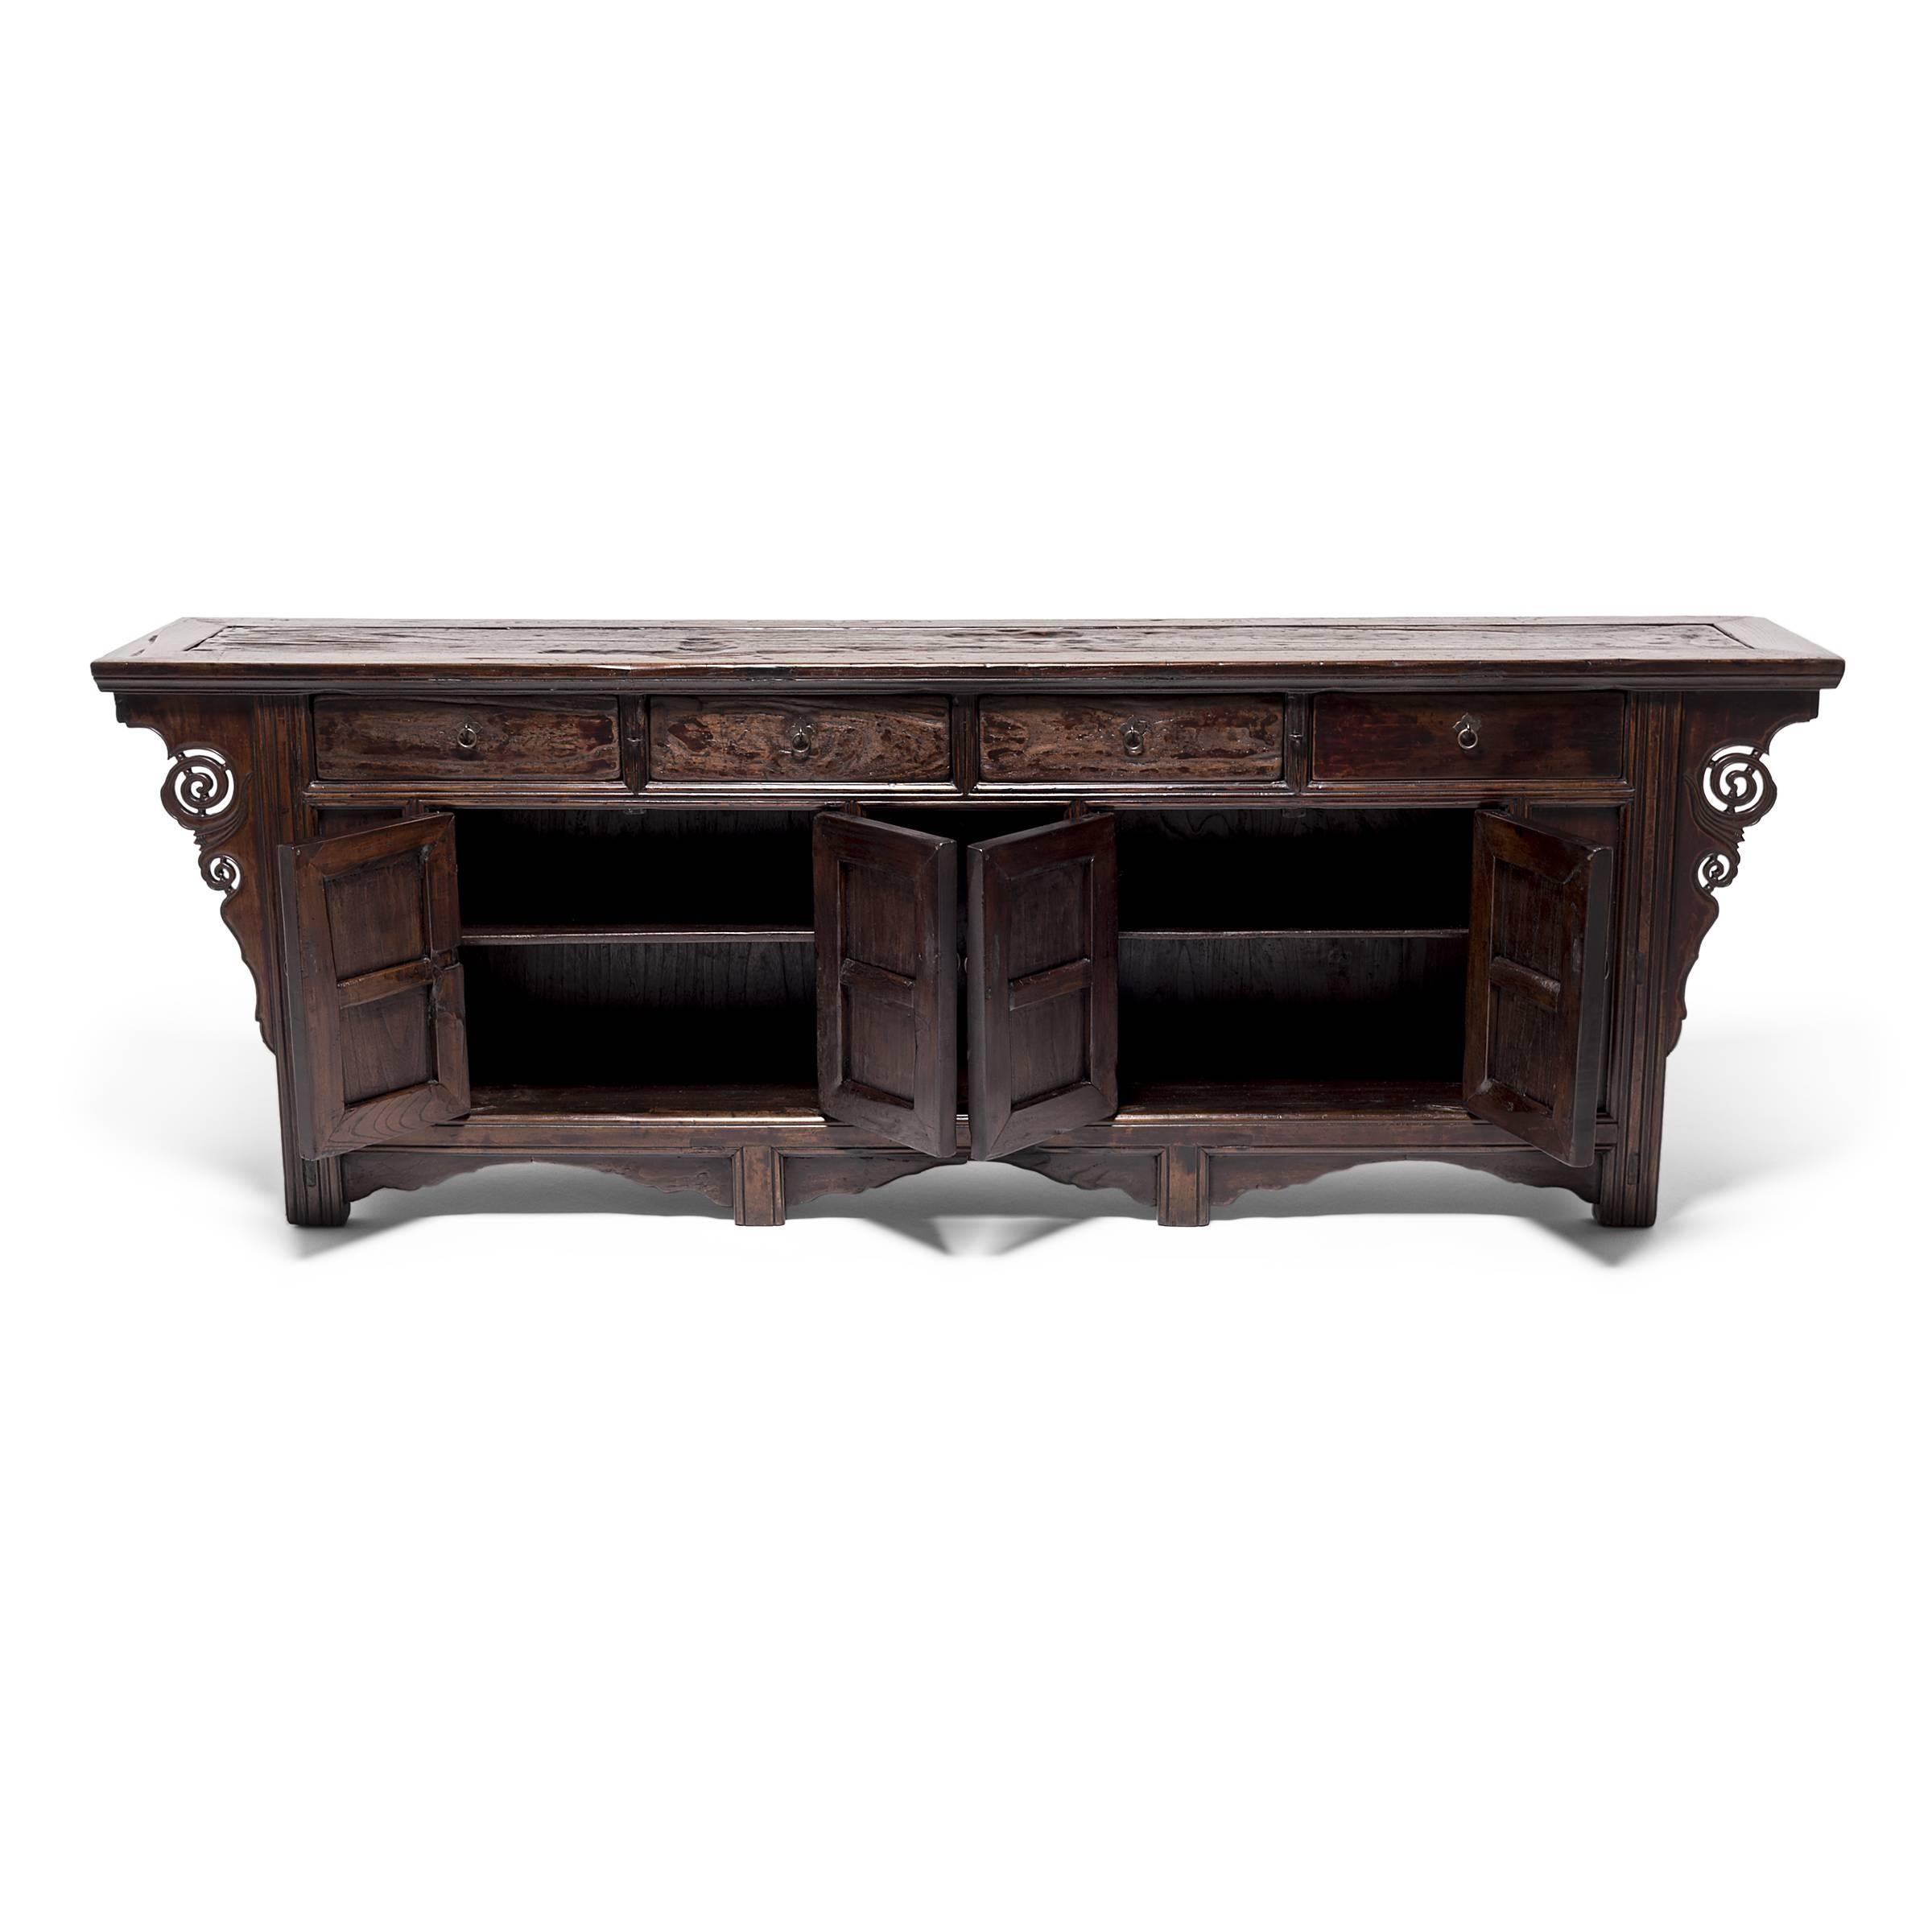 This stately coffer, sized to provide an ample amount of storage, was likely the centrepiece of a well-appointed home in the Shanxi province. A lustrous wax finish enhances the naturally open grain of this Qing-dynasty walnut cabinet, drawing out